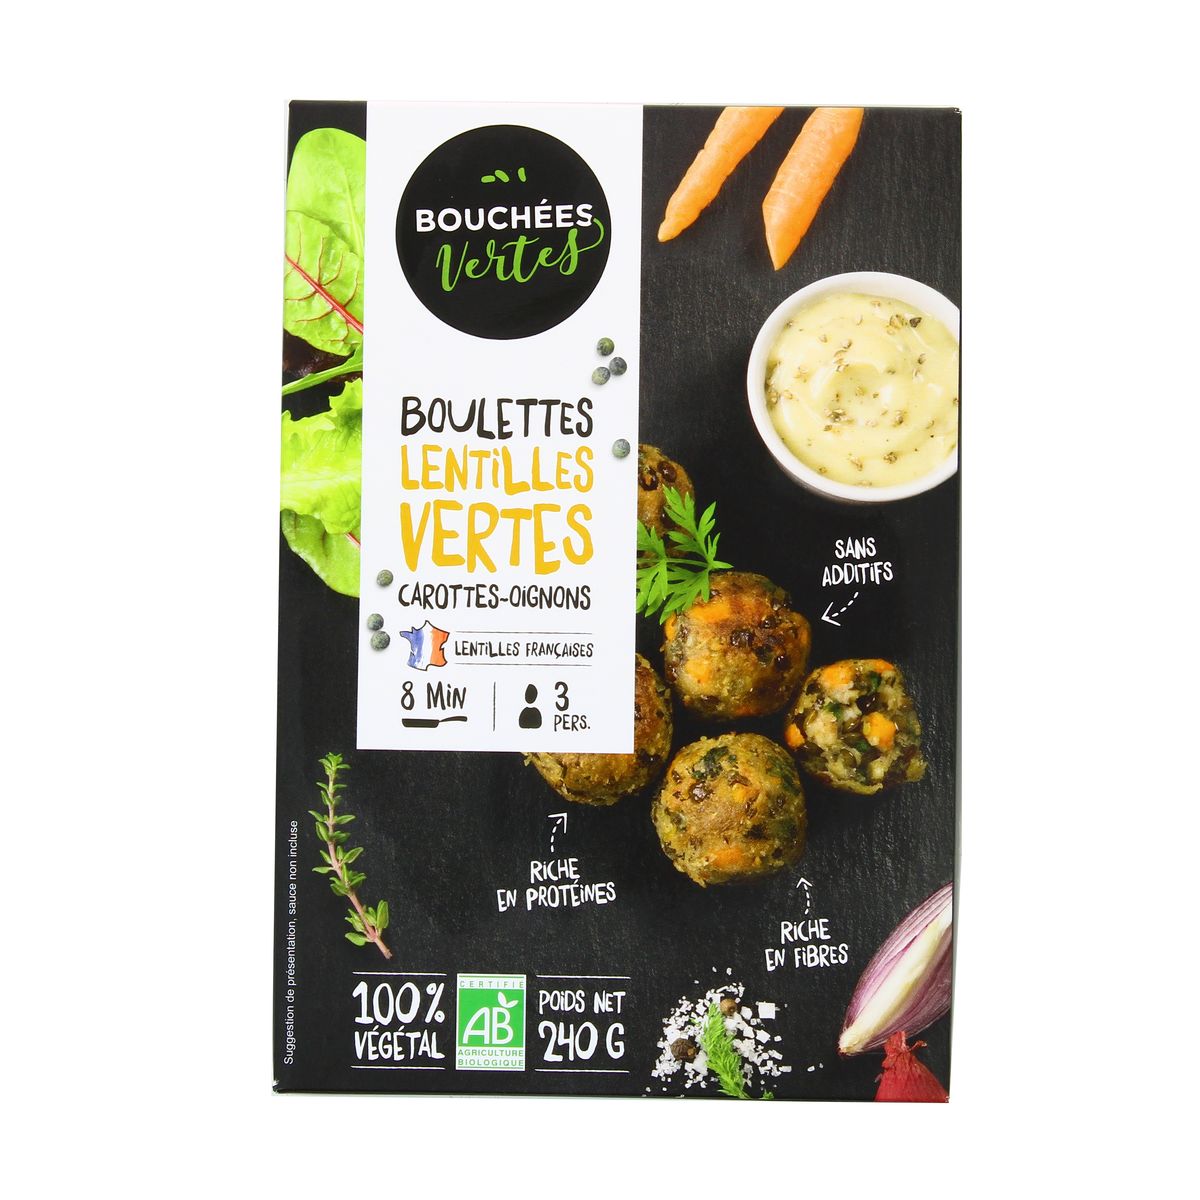 Bouchées Vertes Organic Lentils with Carrots And Onions 240 g